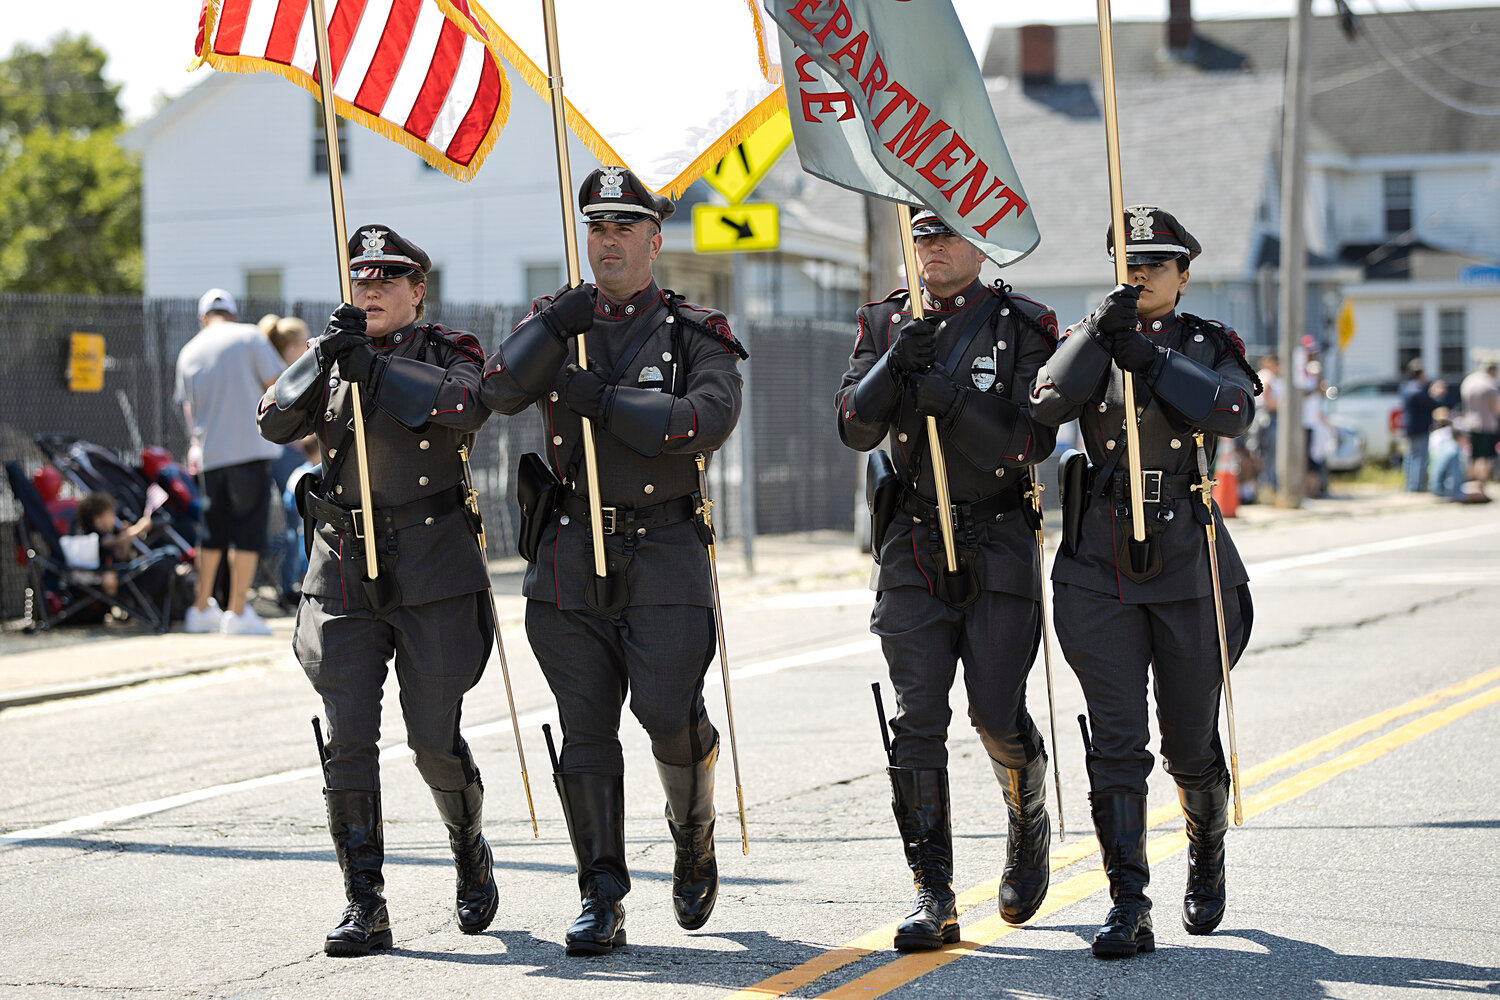 East Providence Police Department color guard.